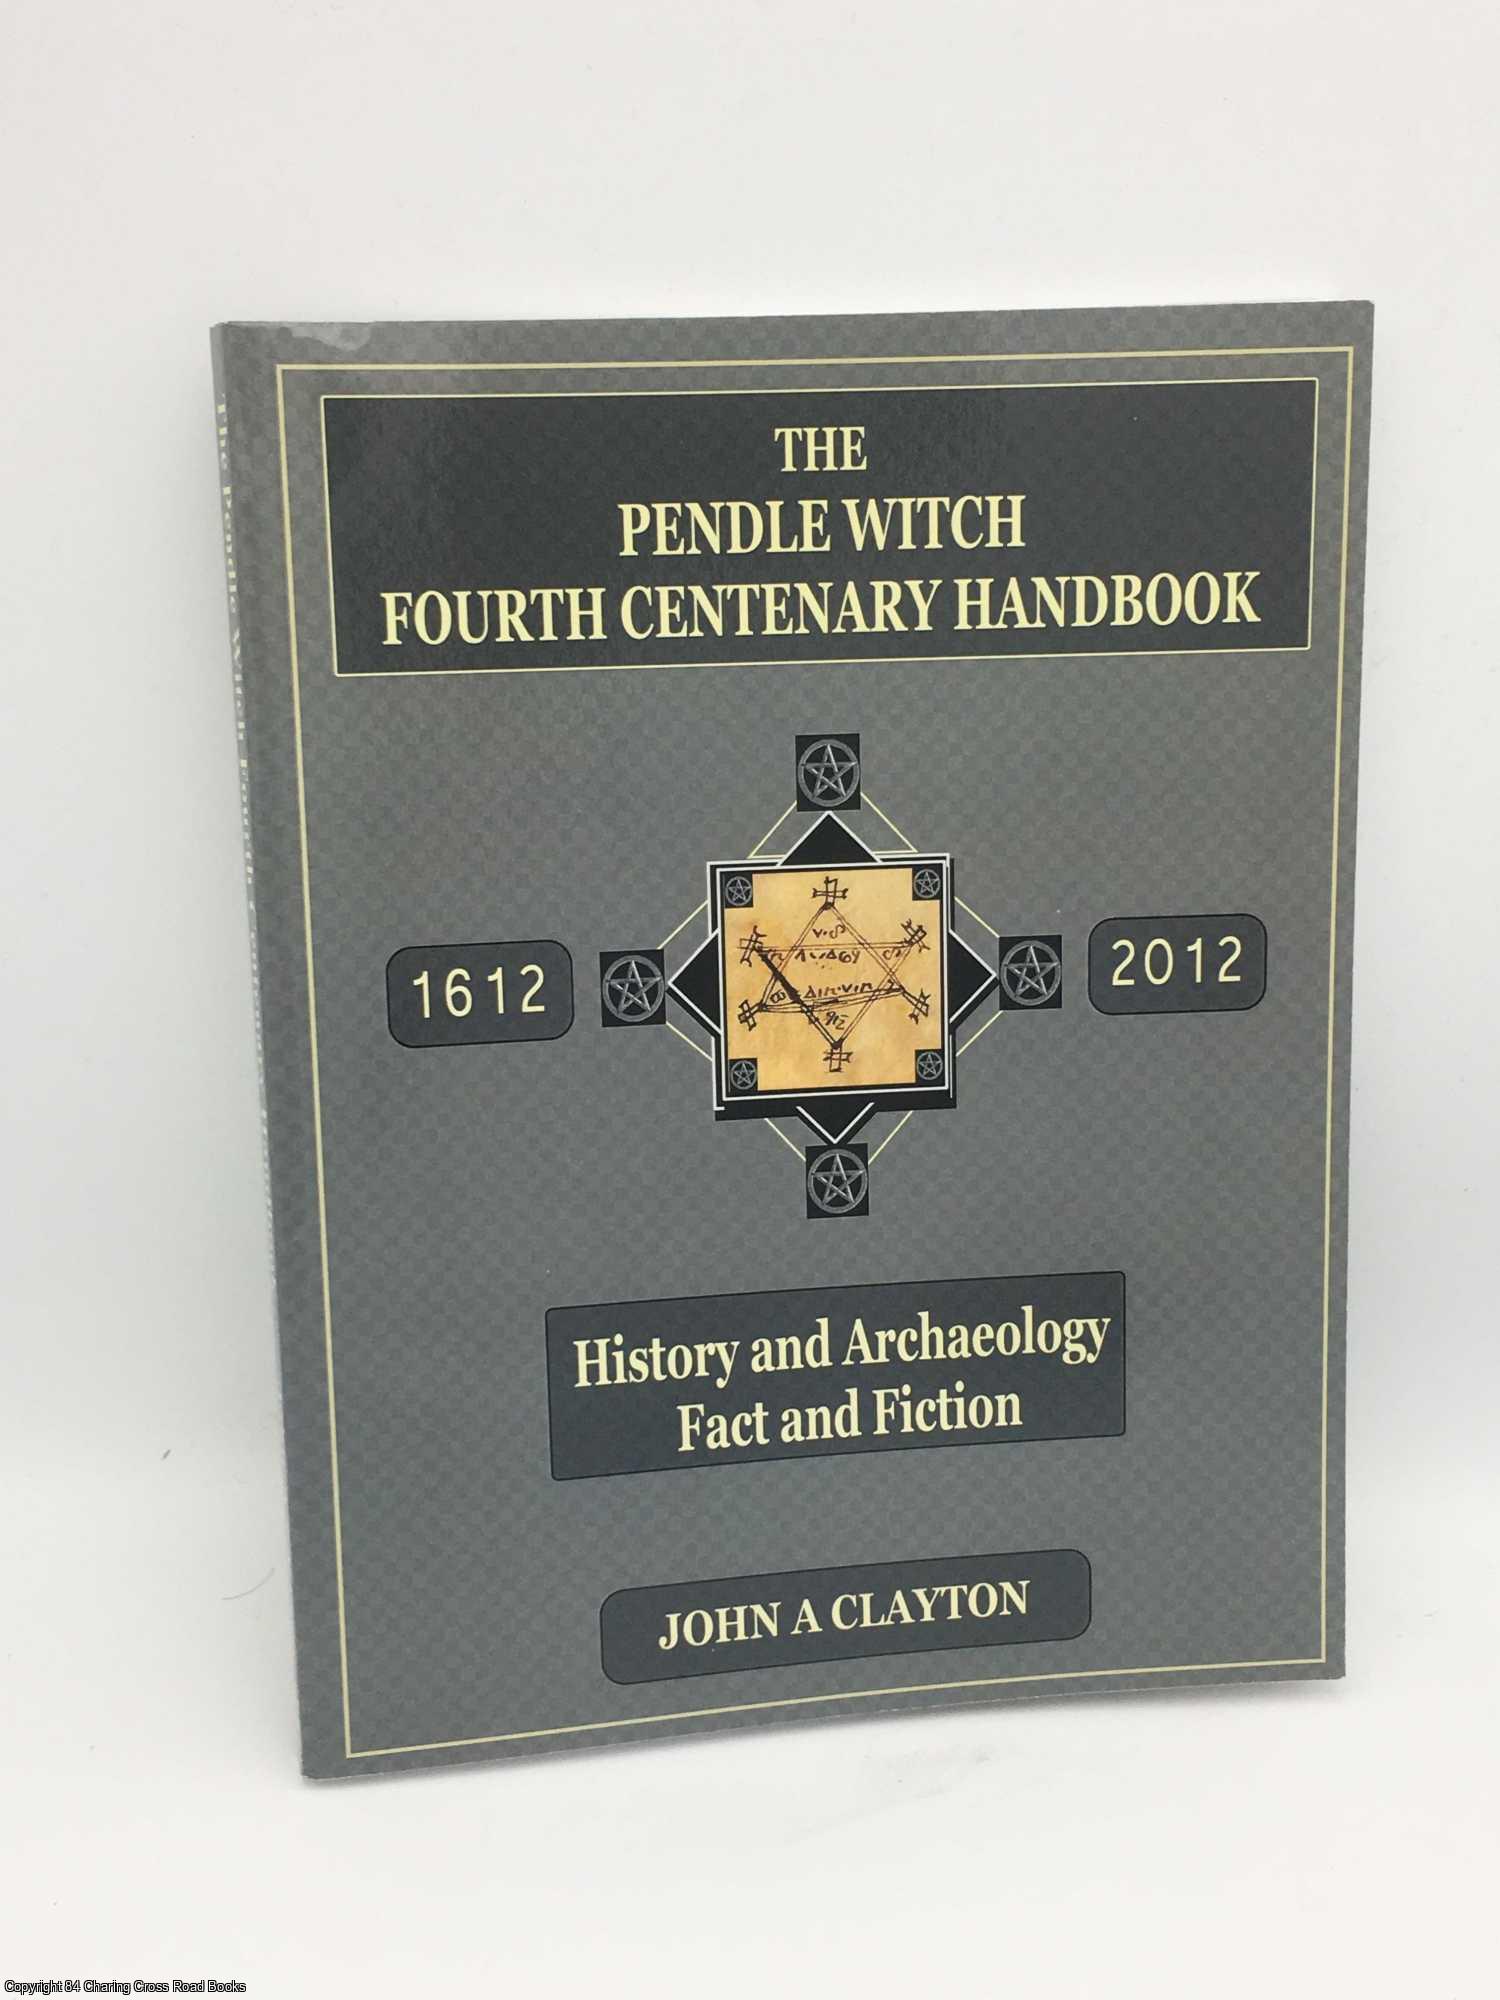 Clayton, John A. - The Pendle Witch Fourth Centenary Handbook: History and Archaeology: Fact and Fiction